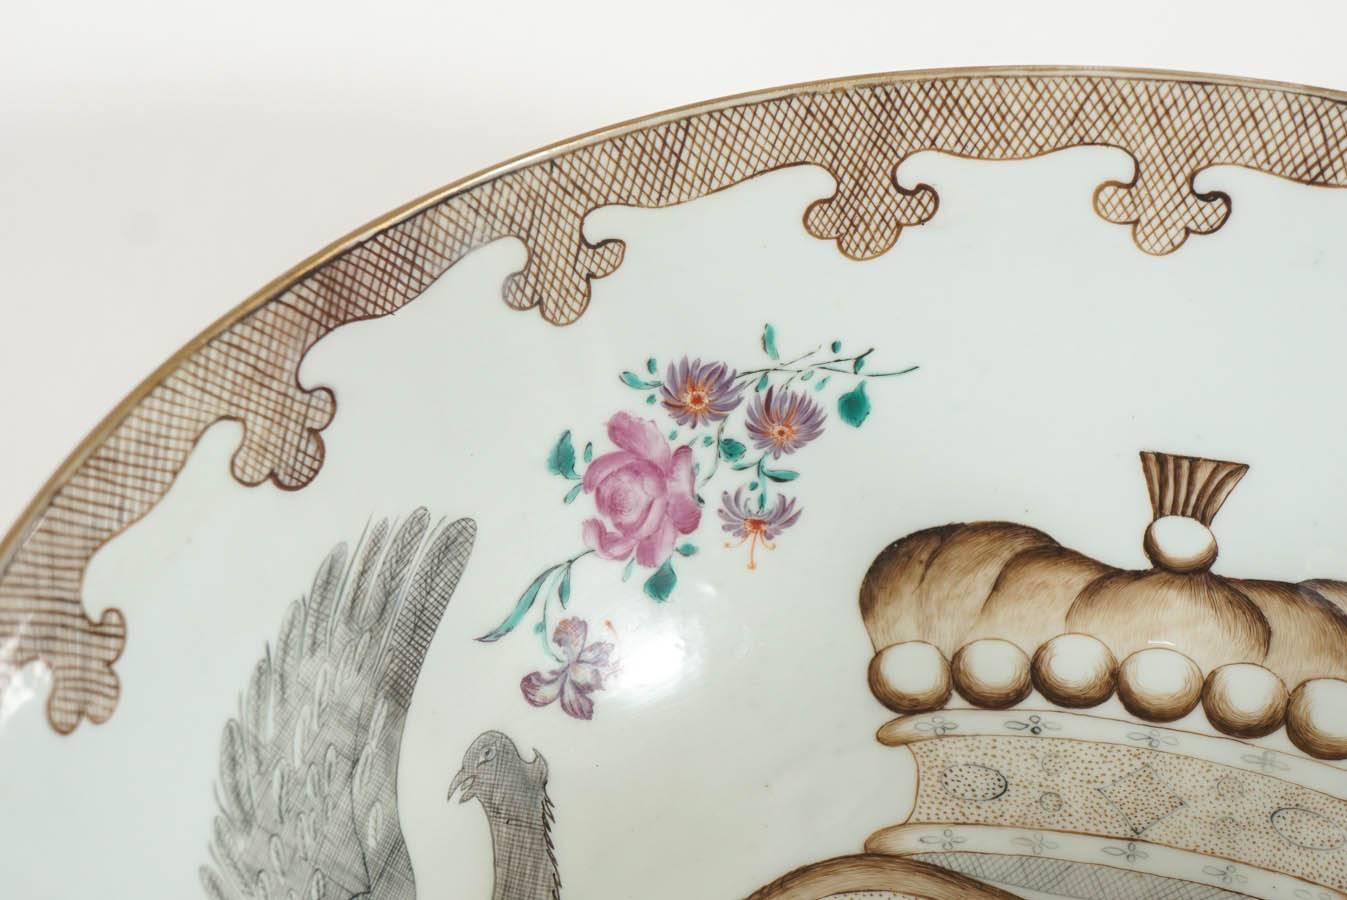 Porcelain The Pleydell-Bouverie Family Punch Bowl, Chinese Export, circa 1750